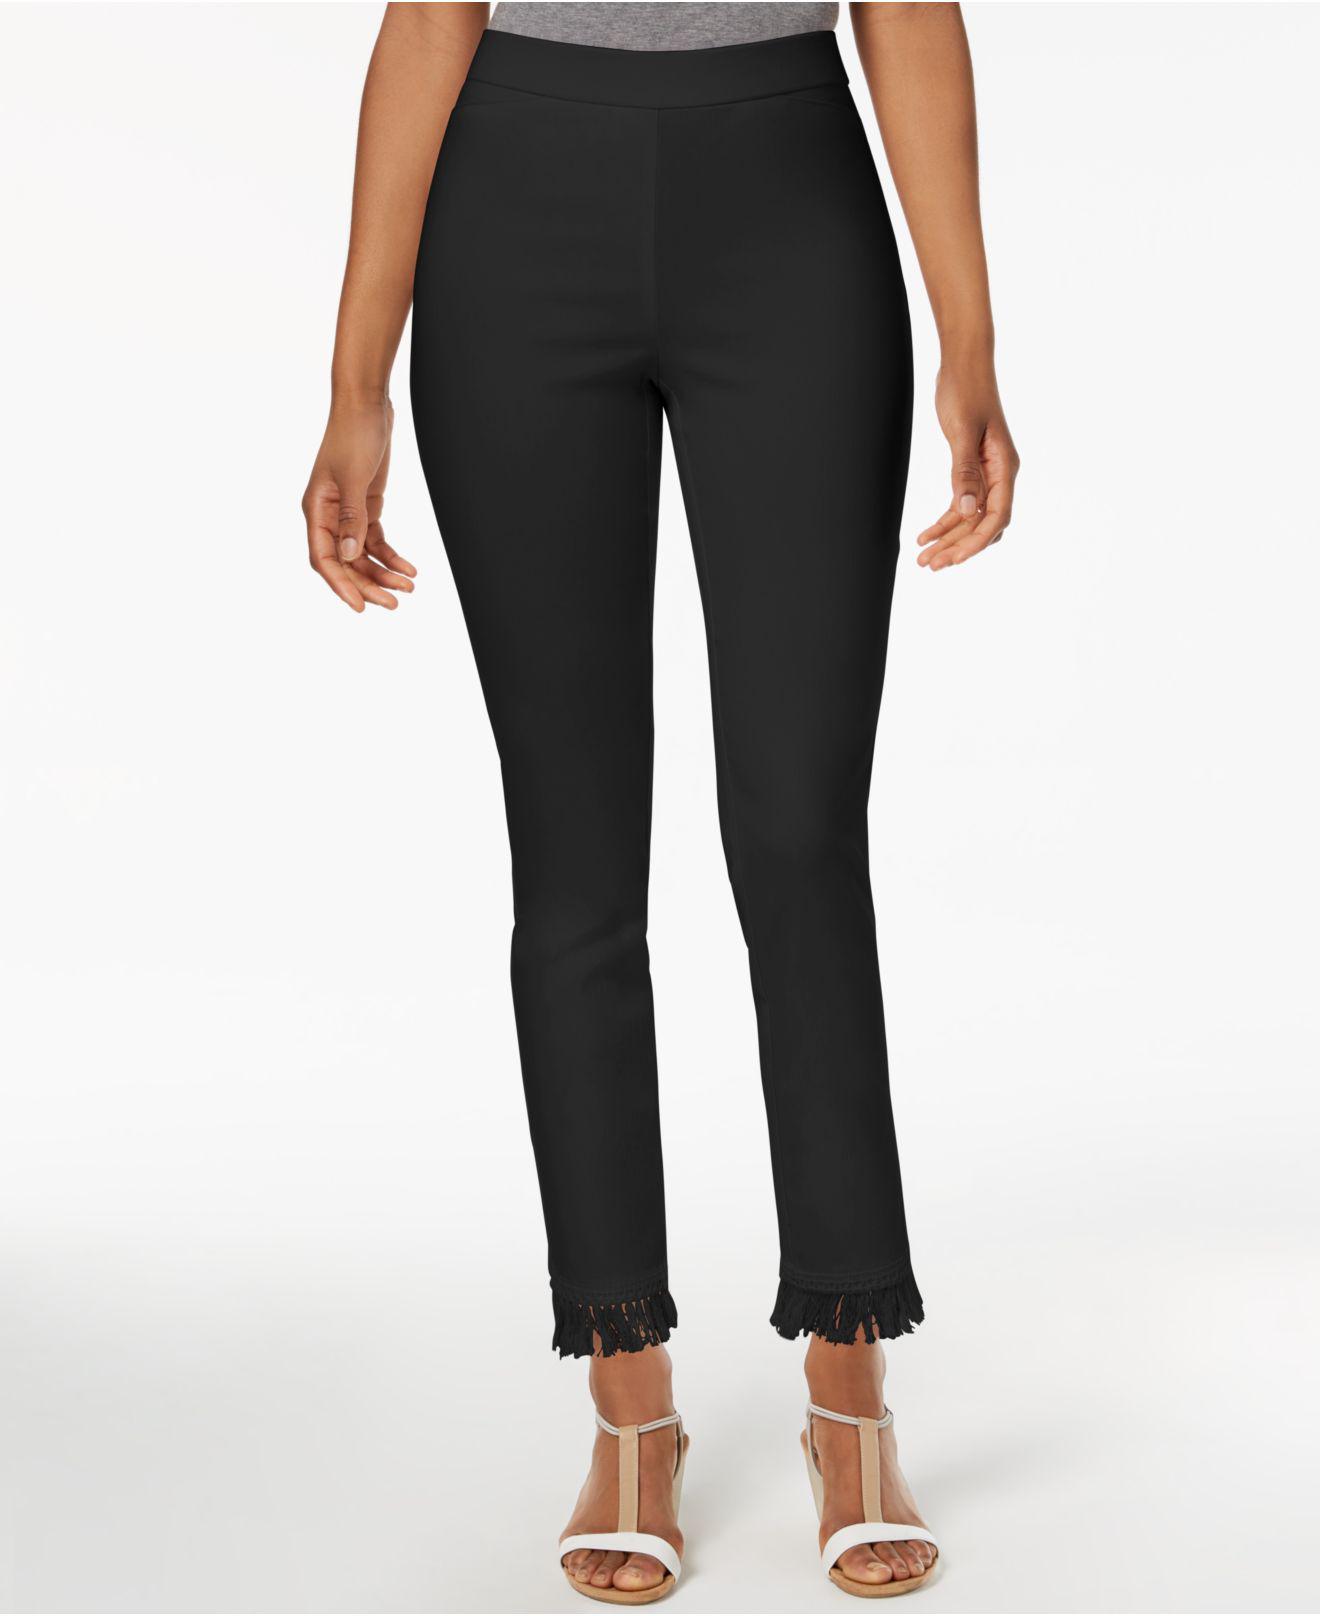 Style & Co Women's Flared Cropped Leggings, Created for Macy's